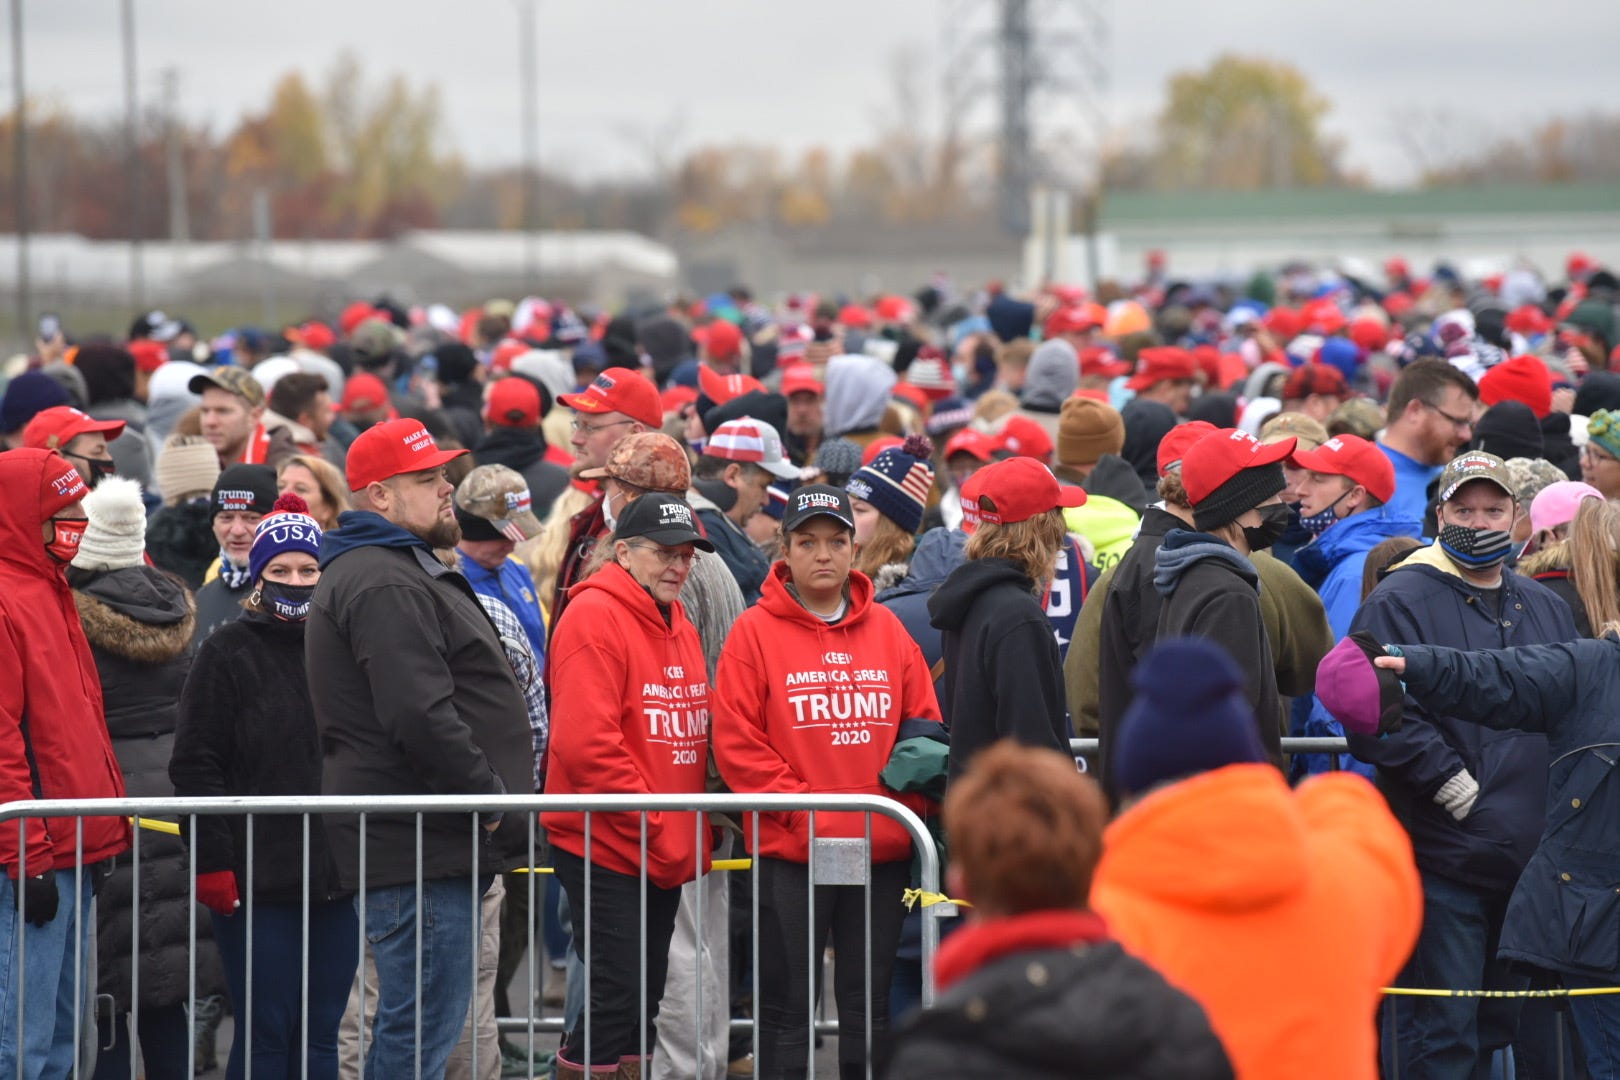 Crowds line up outside the venue before President Donald Trump addresses supporters during his Make America Great Again Victory Rally at AV Flight at the Capital Region International Airport in Lansing, Tuesday, October 27, 2020.